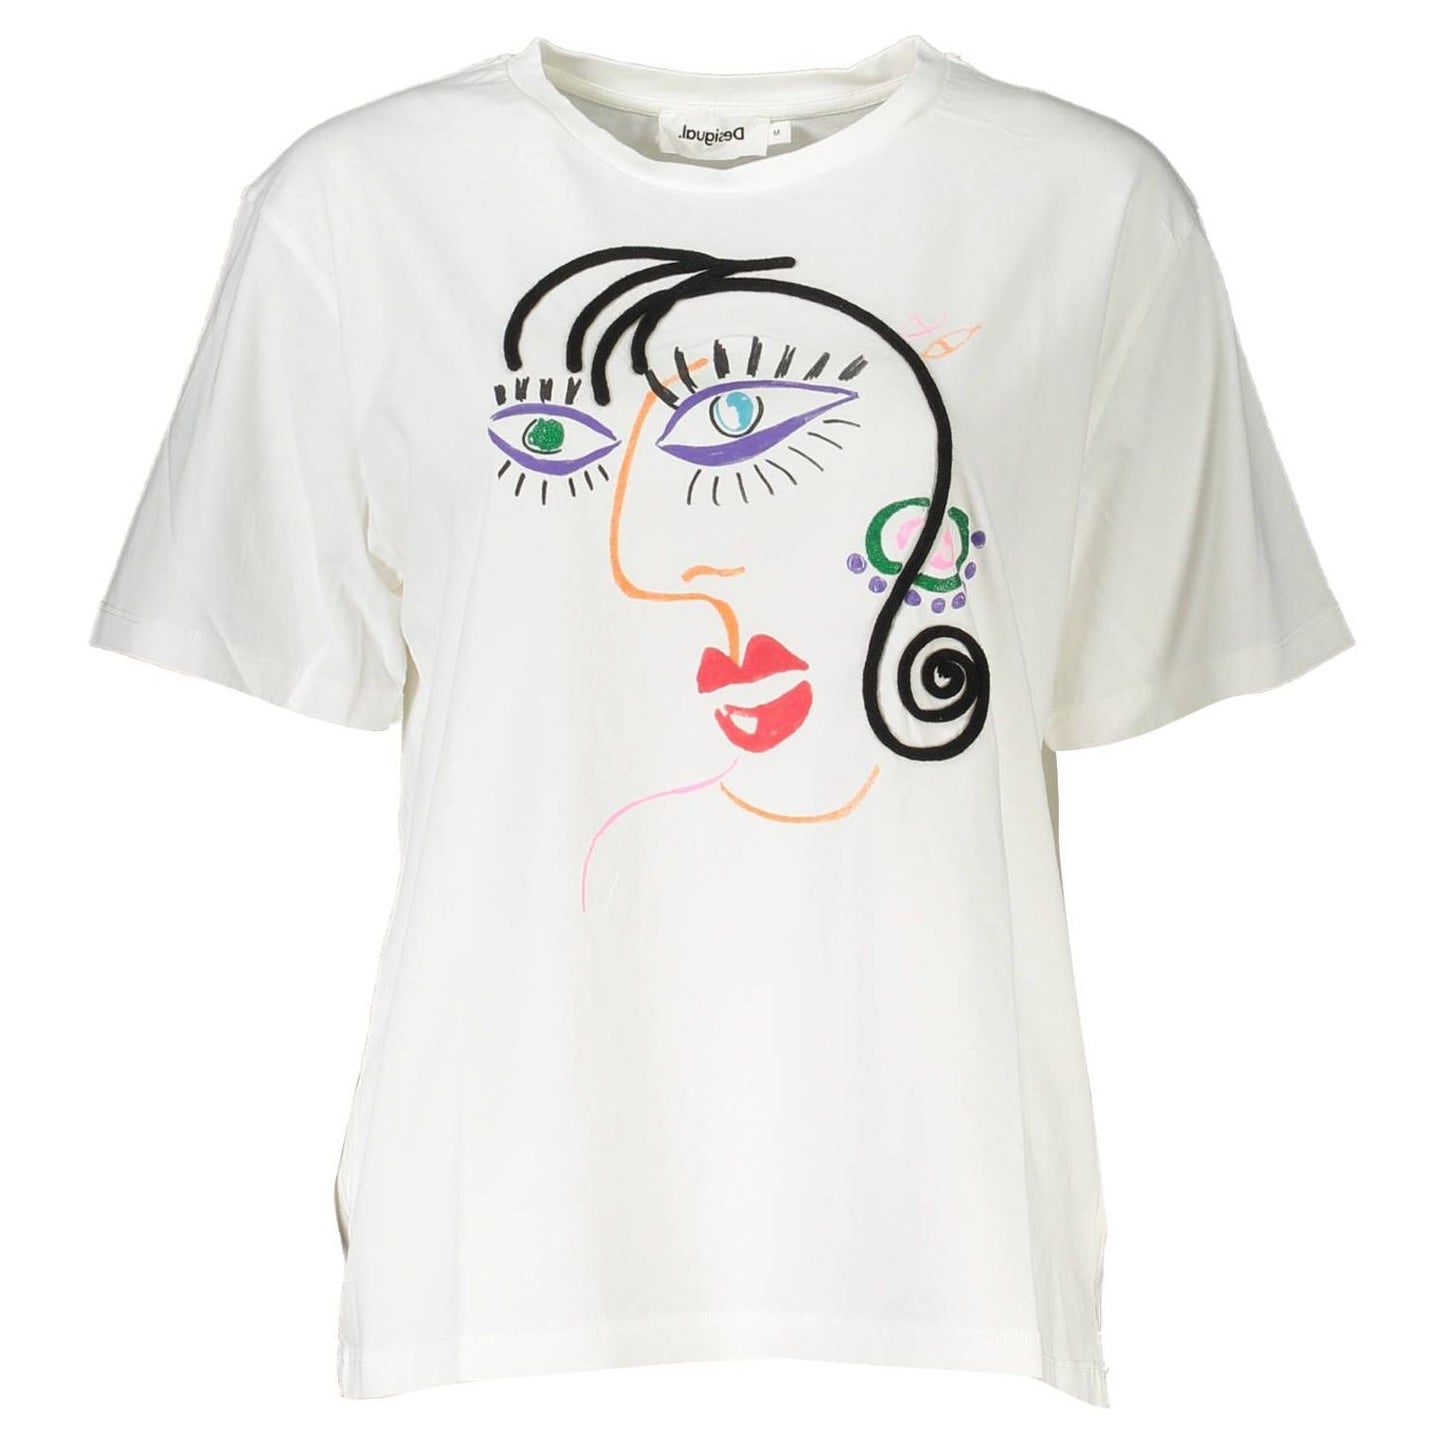 Desigual Chic Embroidered White Tee with Artistic Flair chic-embroidered-white-tee-with-artistic-flair